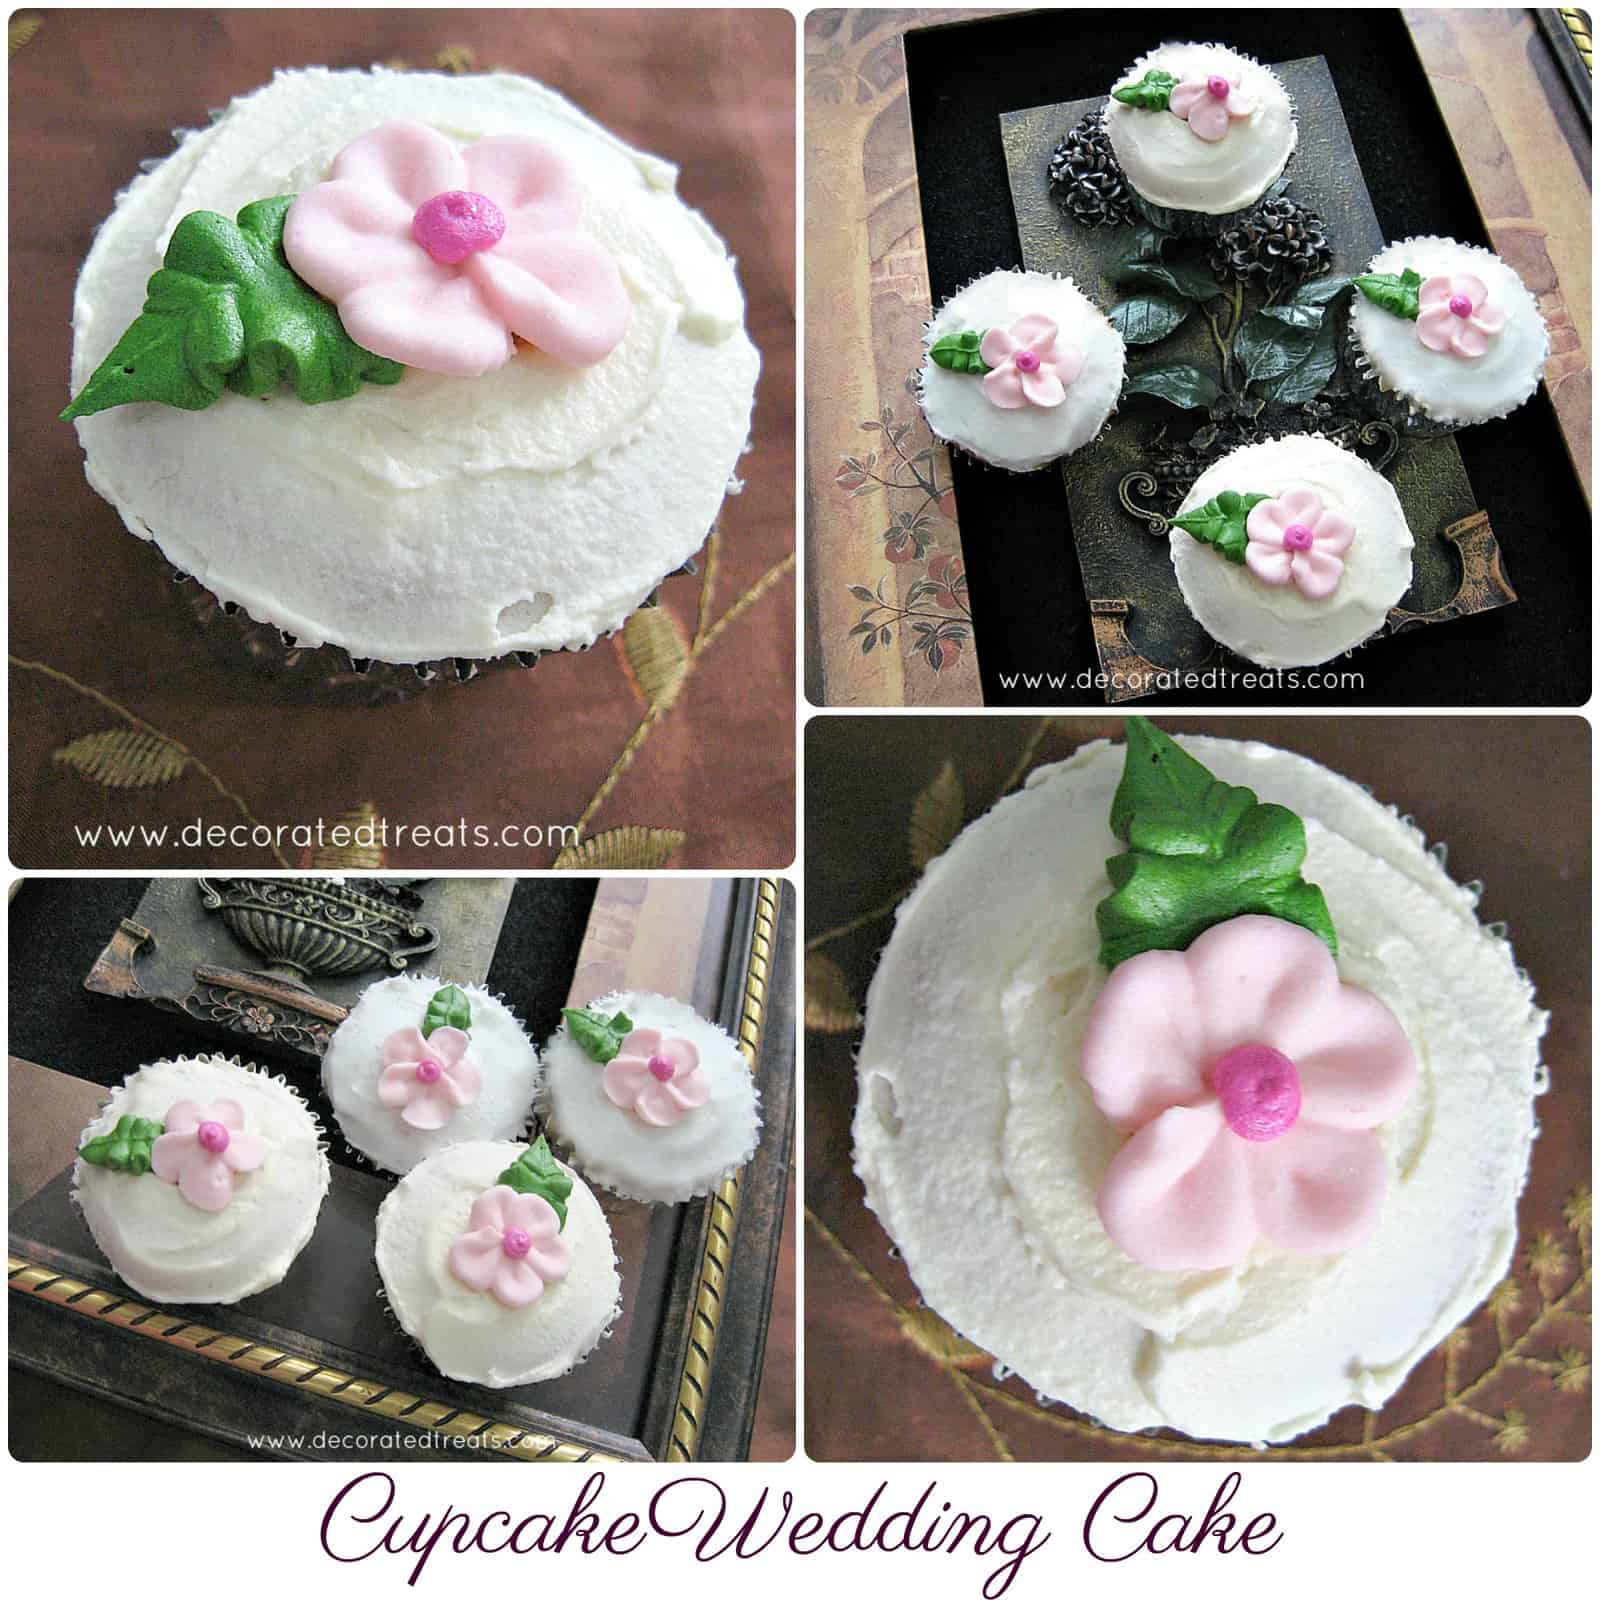 A poster cupcake wedding cake with pink floral deco